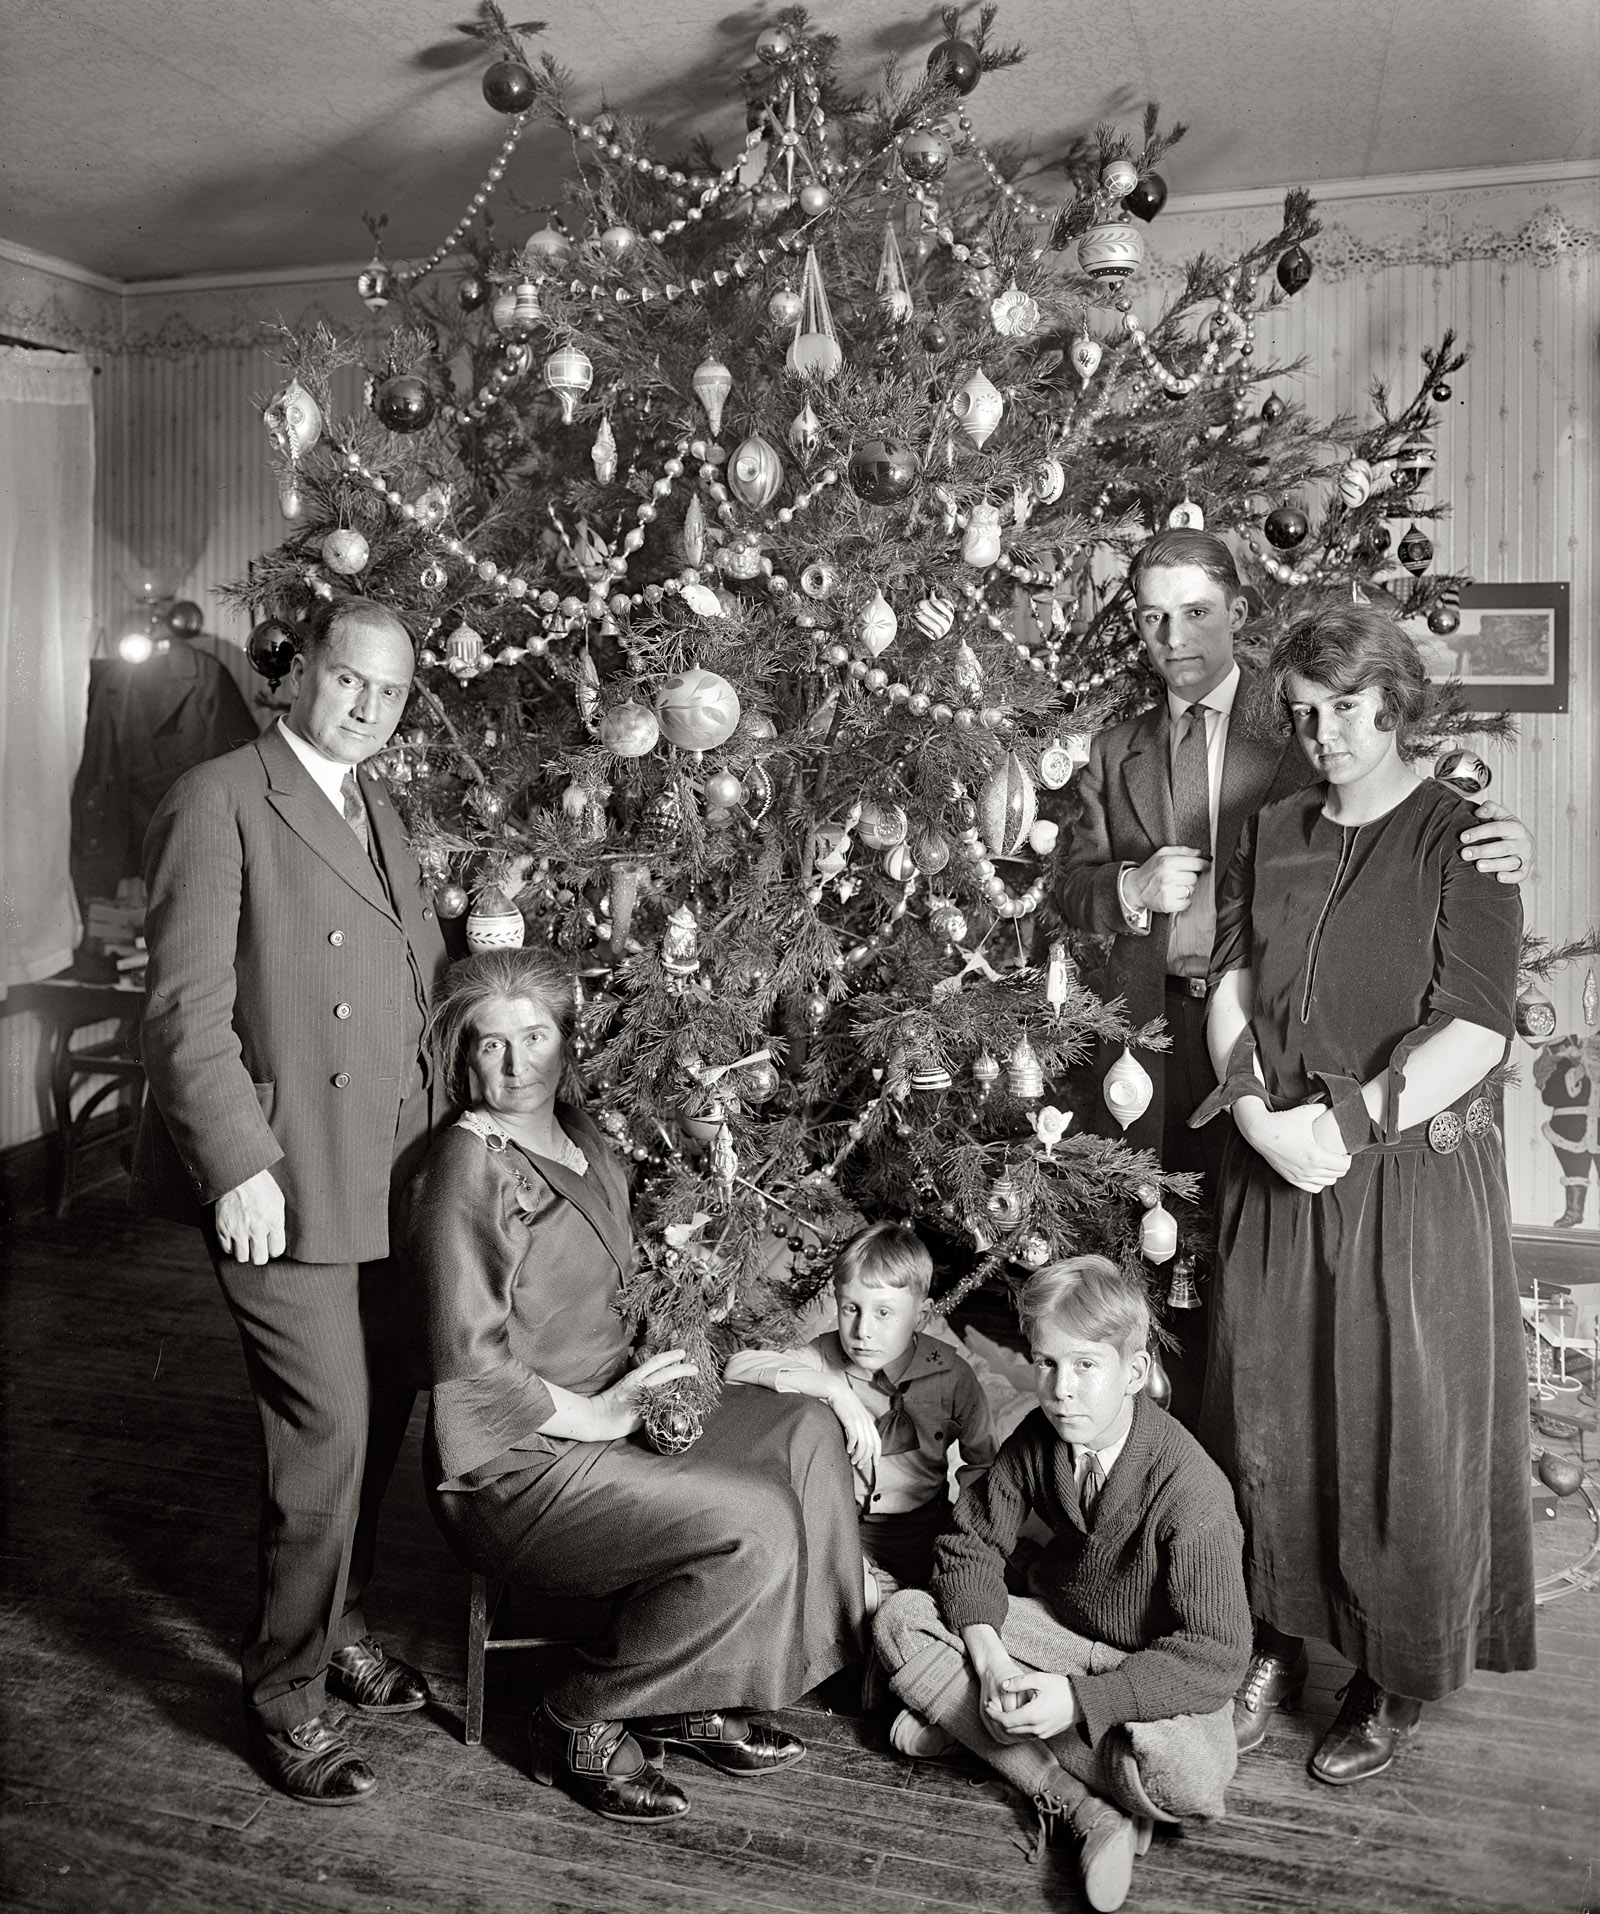 One Hundred Years of Yuletude: "Dickey Christmas tree, 1923." The family of Washington, D.C.,  lawyer Raymond Dickey, whose off-kilter portraits (and non-triangular trees) are a beloved yuletide tradition here at Shorpy. National Photo Company glass negative. View full size.
